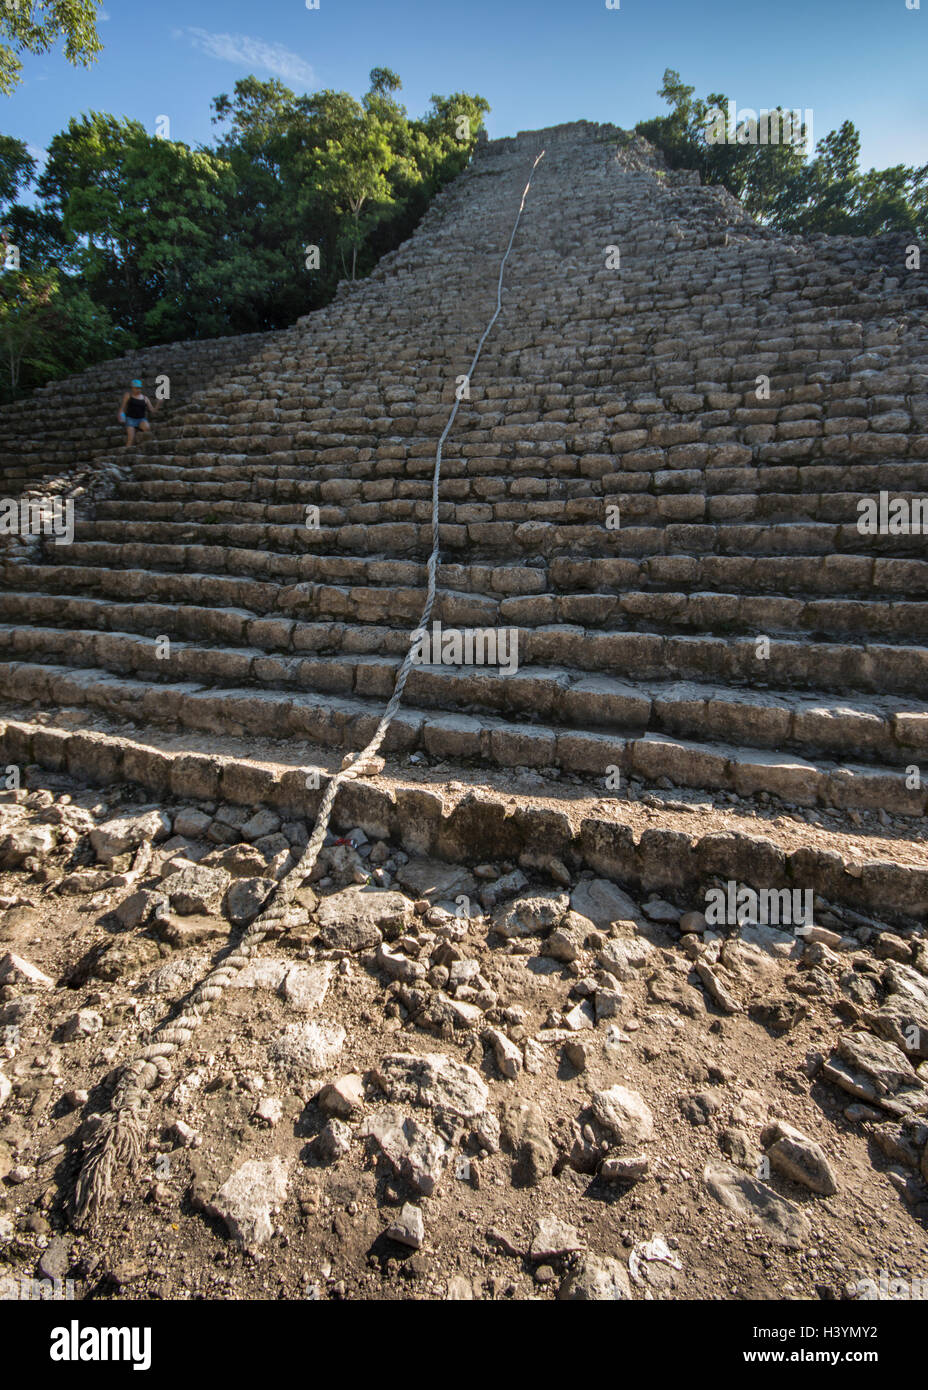 Coba is the longest pyramid in Quintana Roo (Rivera Maya, Mexico) and its allowed to be climbed helped by a rope. Stock Photo